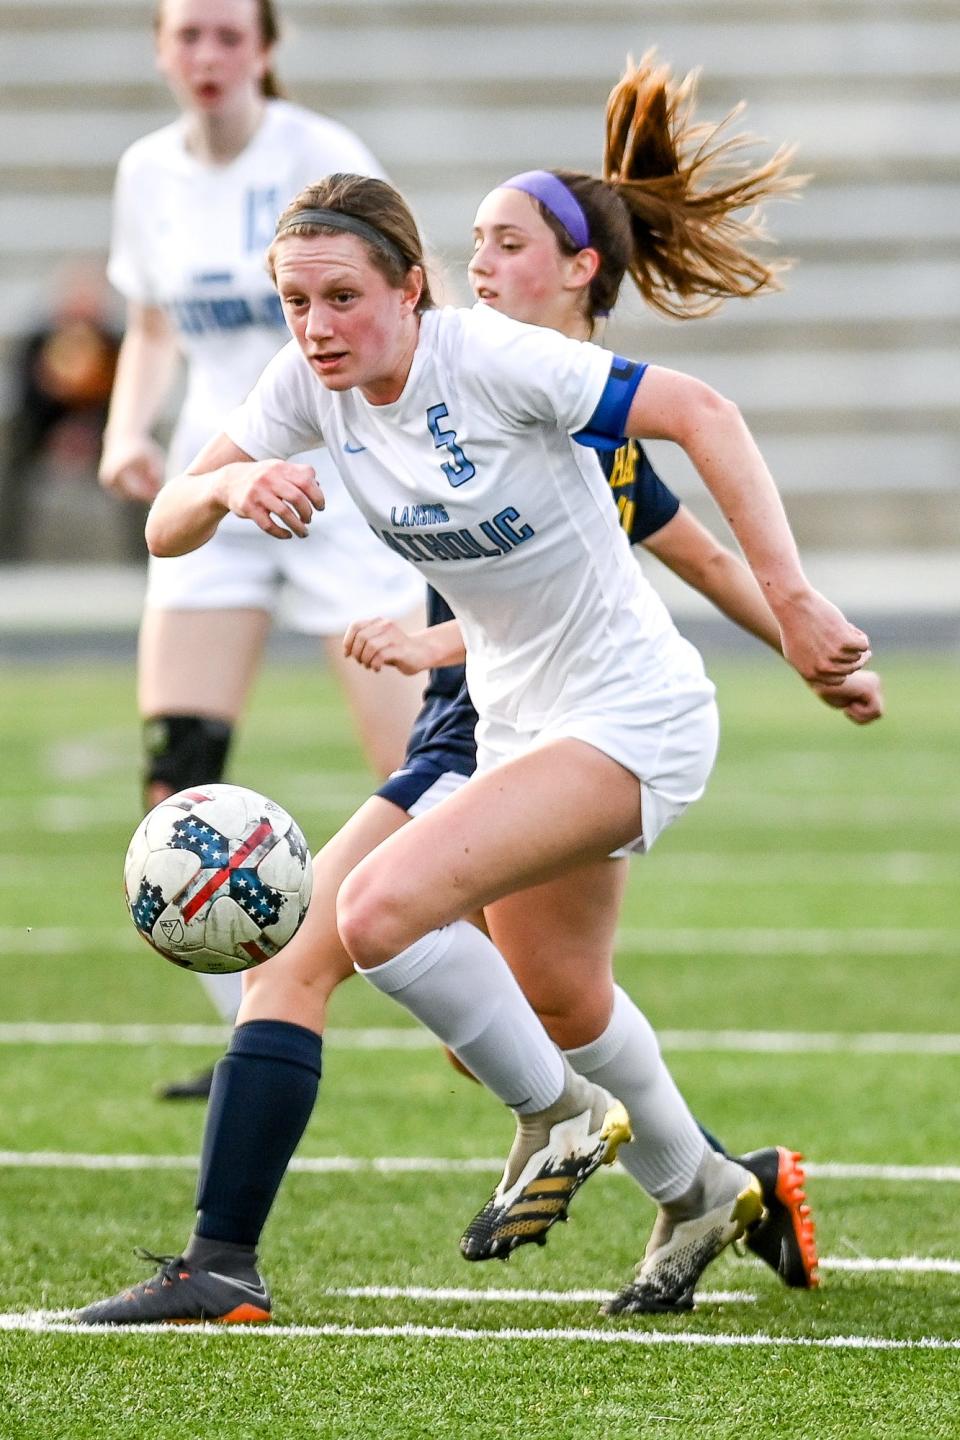 Lansing Catholic's Maddie O'Farrell moves the ball against Haslett during the first half on Tuesday, May 18, 2021, at Haslett High School.